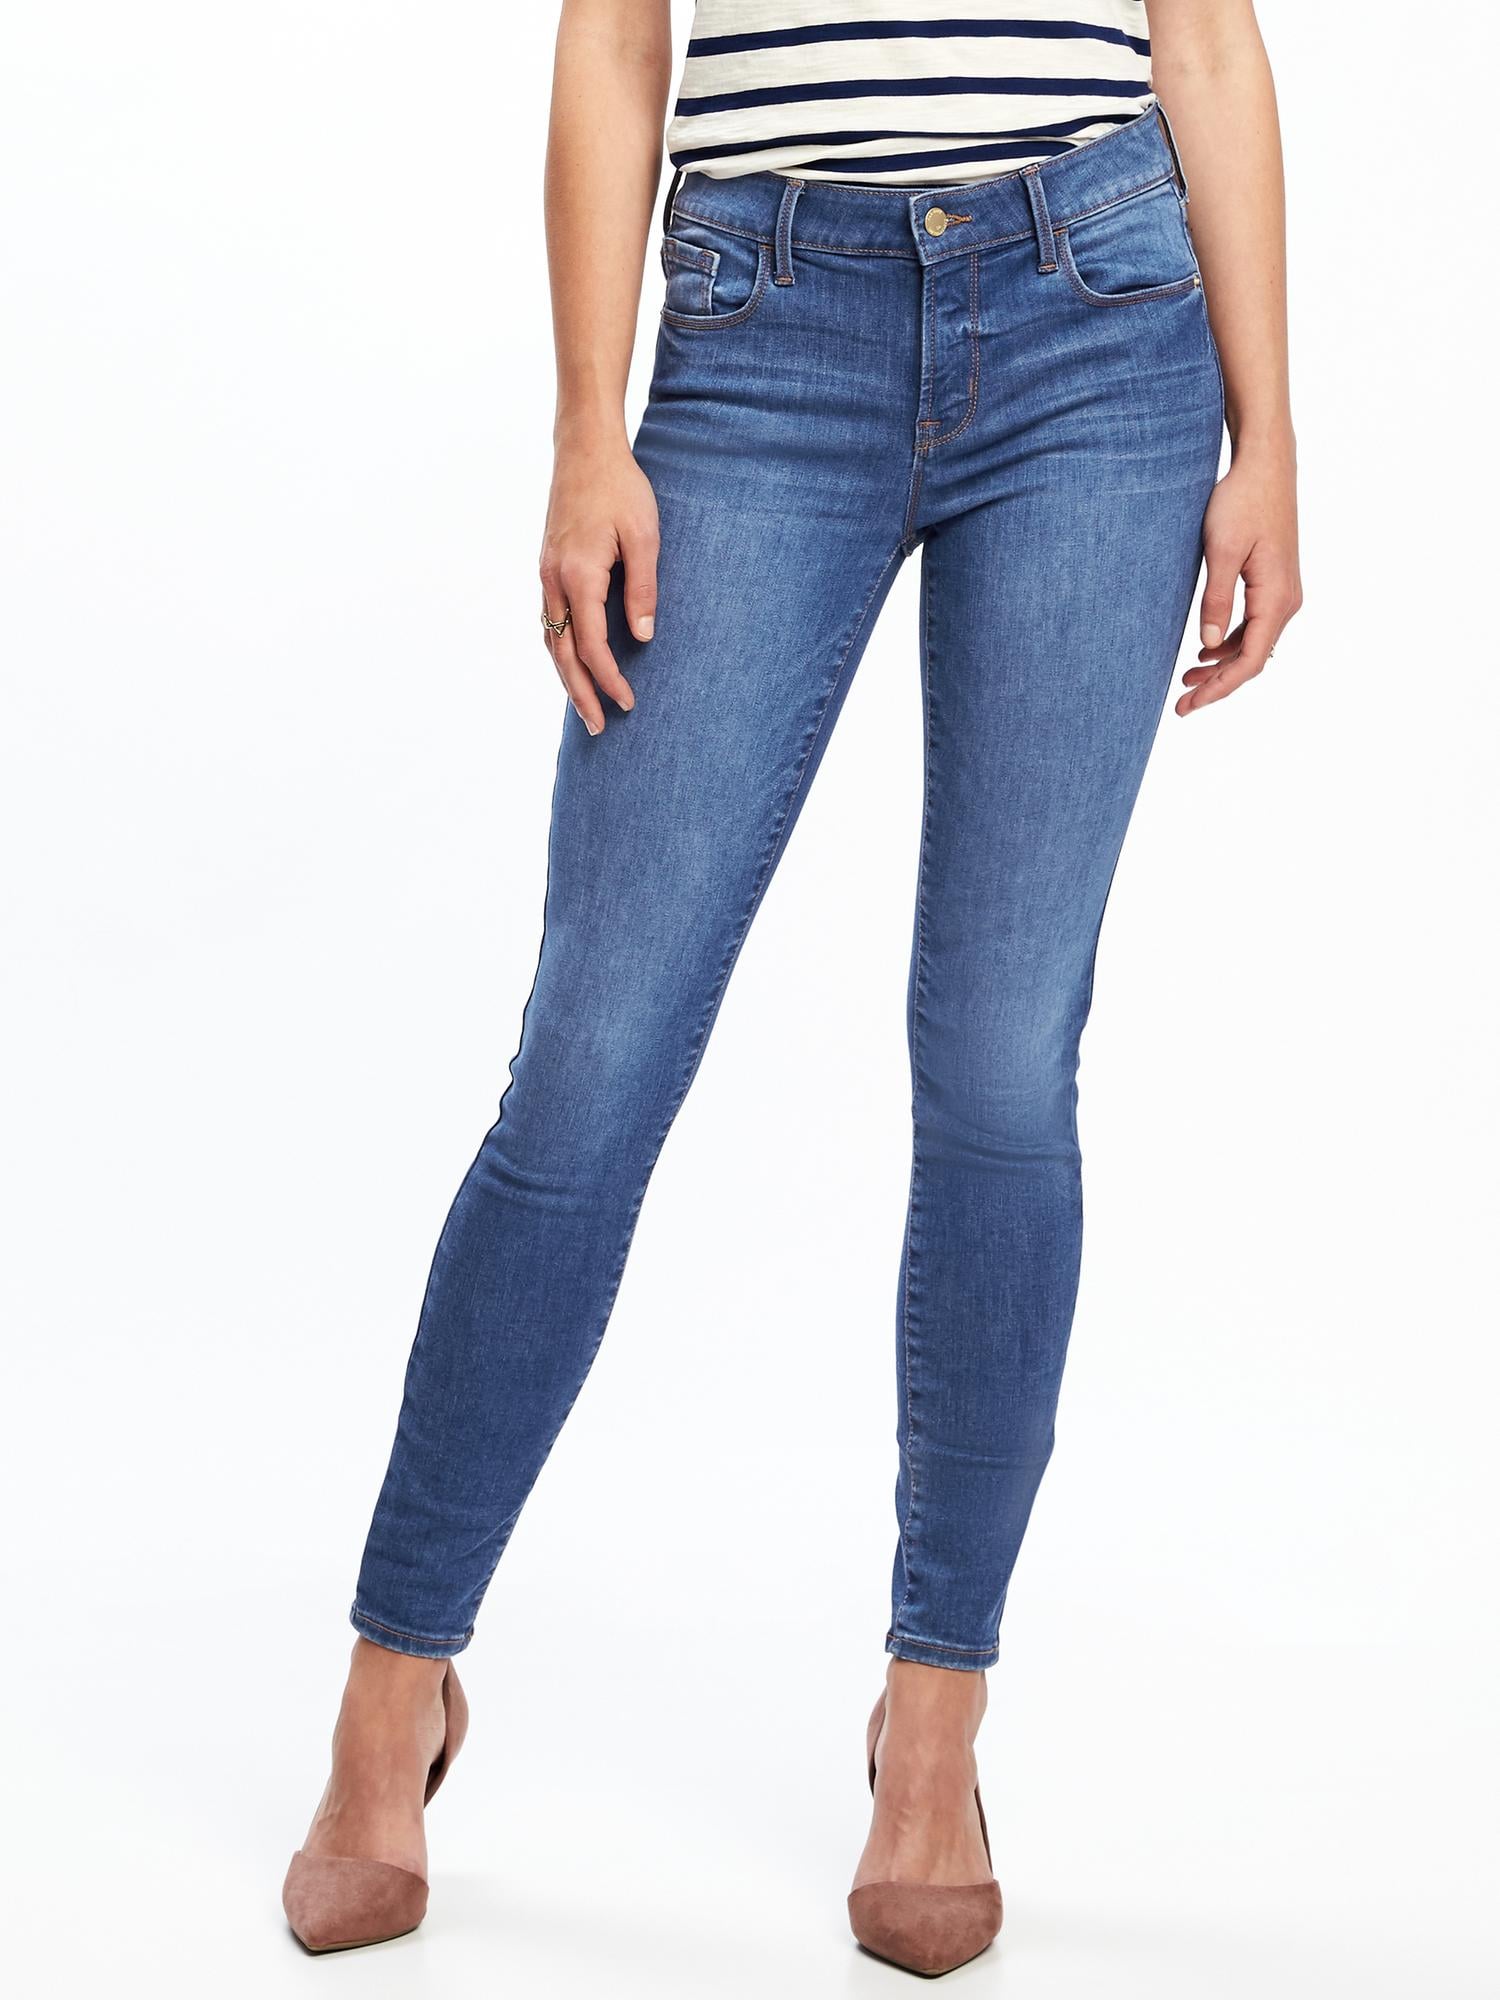 Mid Rise Built In Sculpt Rockstar Jeans For Women Old Navy